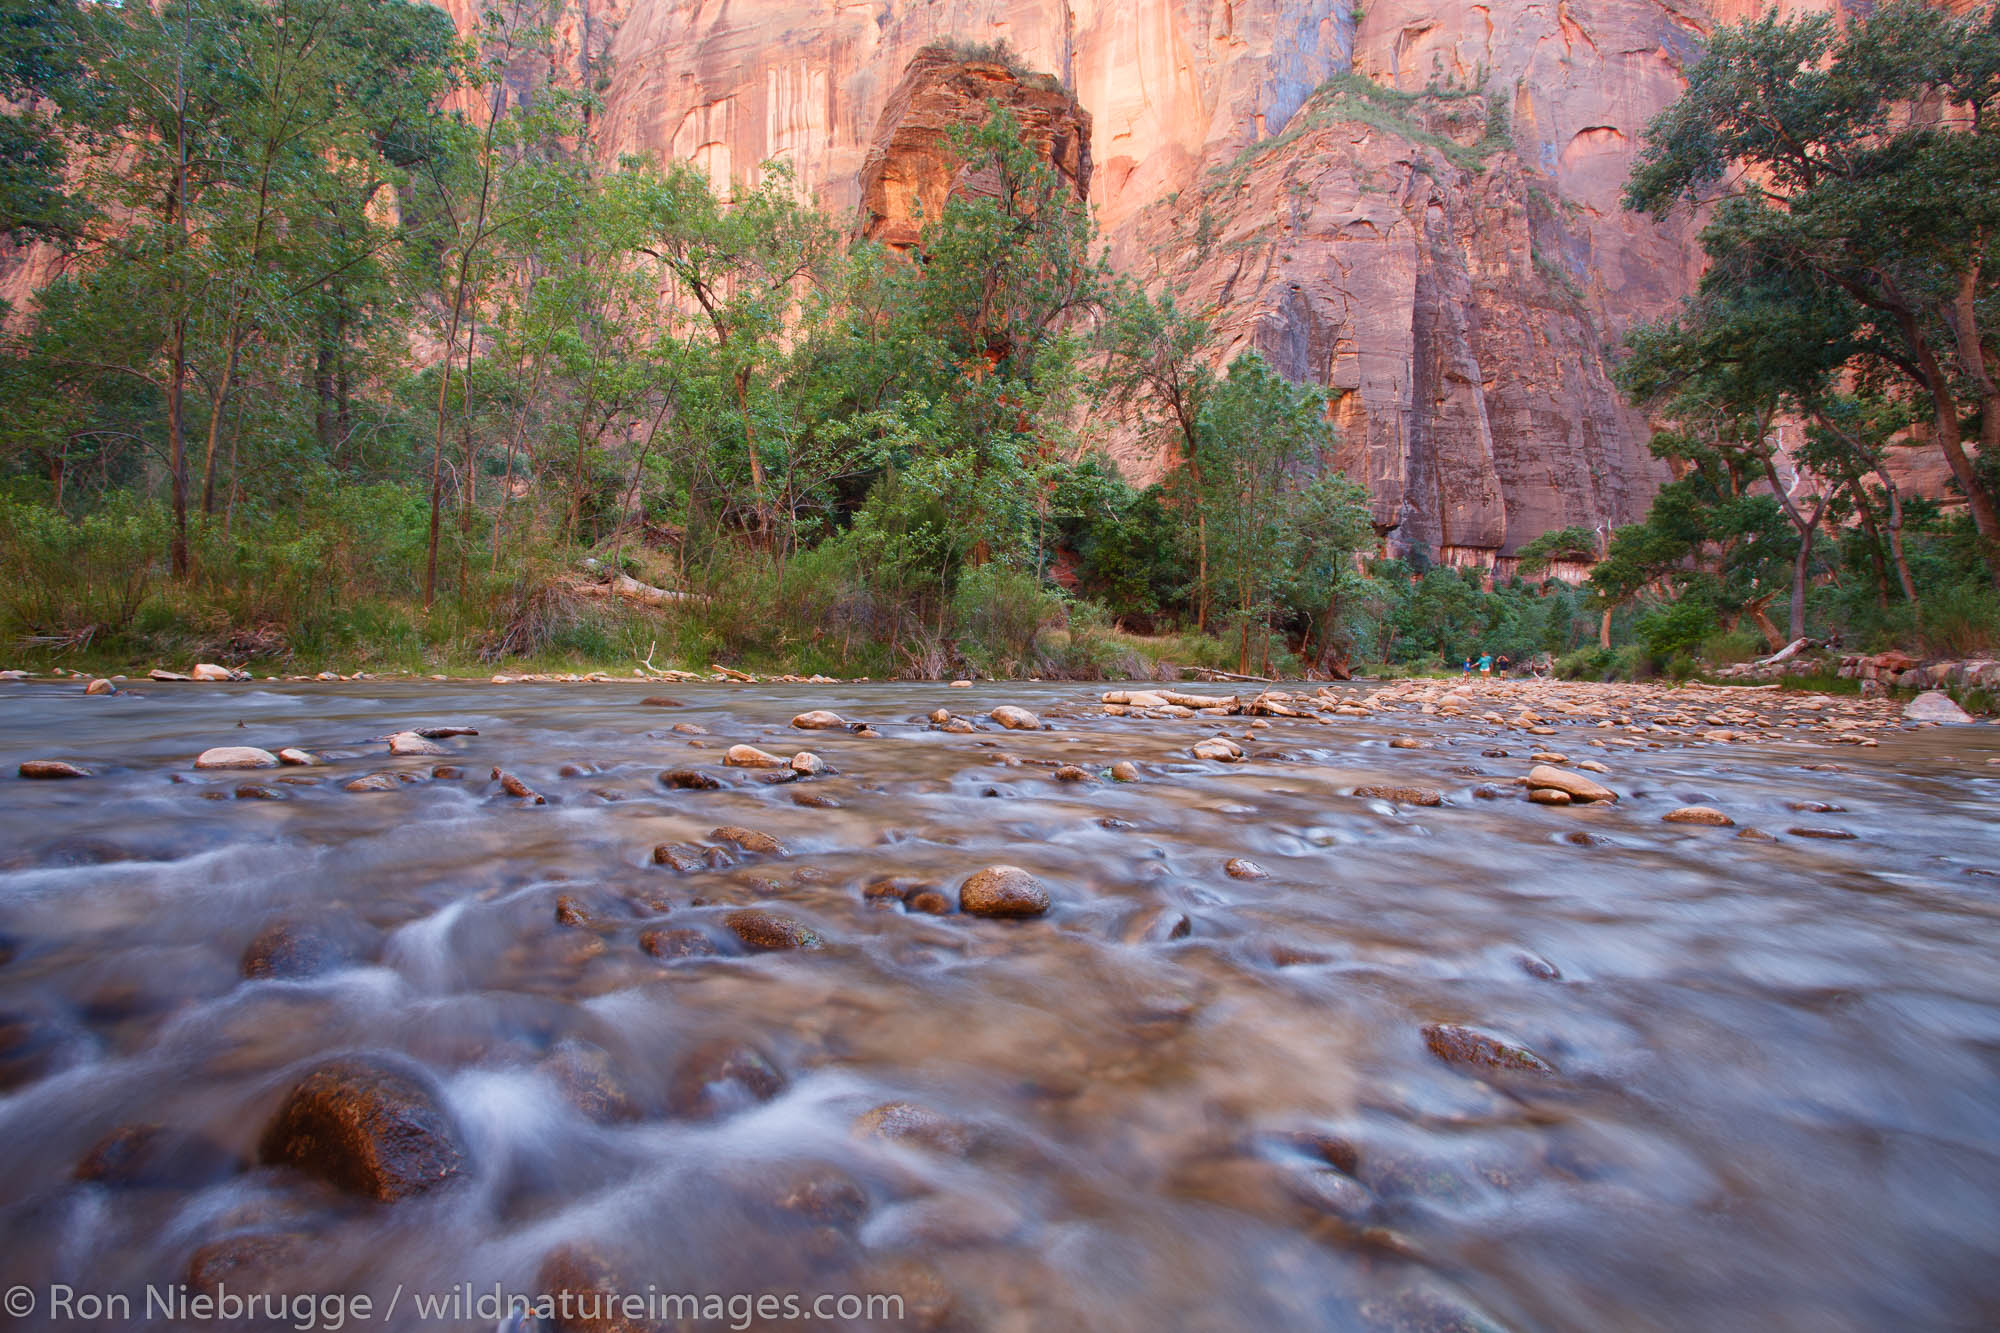 Hikers in the Virgin River near the Temple of Sinawava, Zion National Park, Utah.